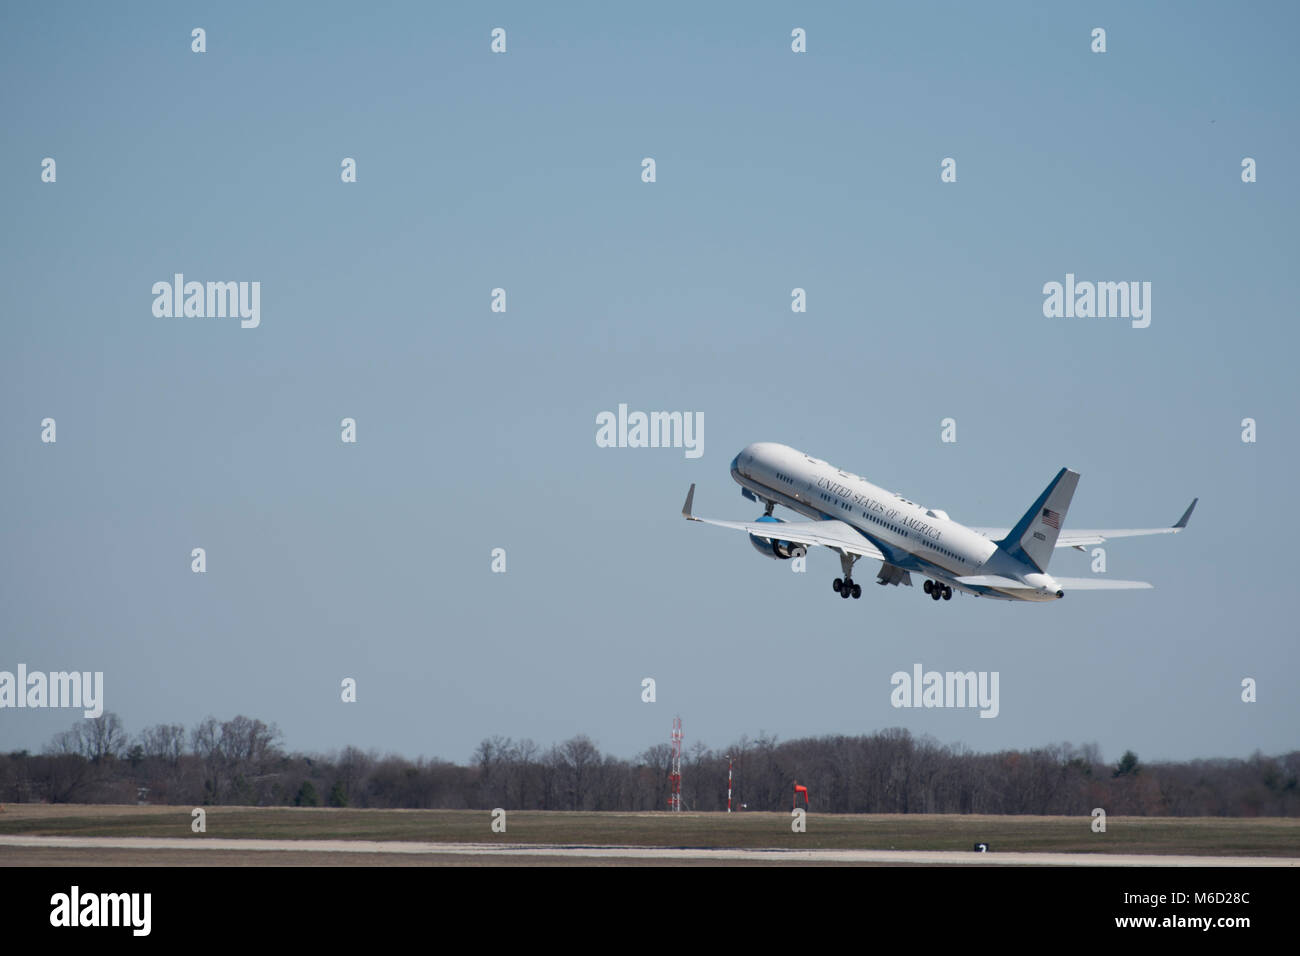 Air Force Two departs Joint Base Andrews, Feb. 27, 2018. The 89th Airlift Wing provides global Special Air Mission airlift, logistics, aerial port and communications for the president, vice president, cabinet members, combatant commanders and other senior military and elected leaders as tasked by The White House, United States Air Force chief of staff and Air Mobility Command. (U.S. Air Force photo/Tech. Sgt. Robert Cloys) Stock Photo